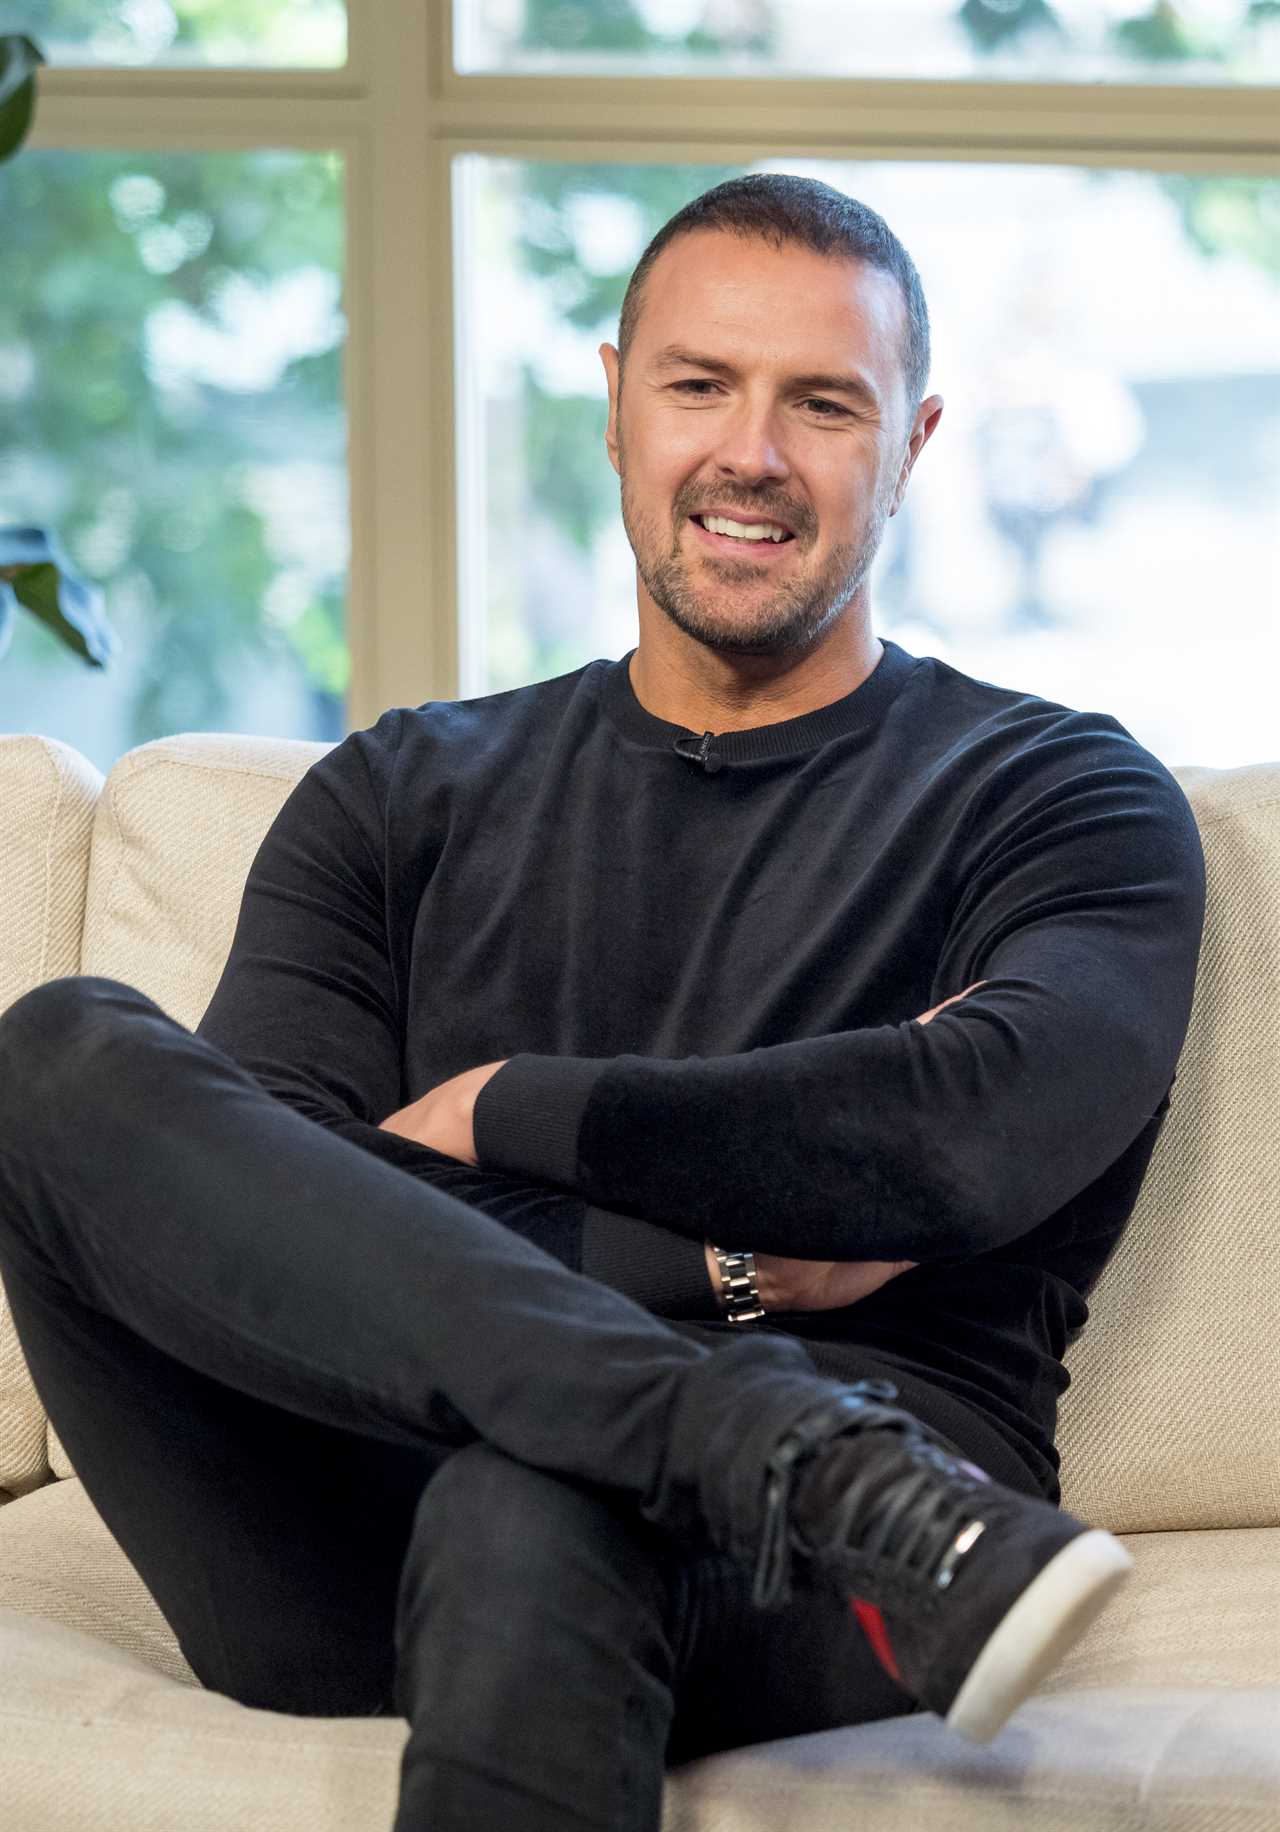 Who is Paddy McGuinness and what is his net worth?